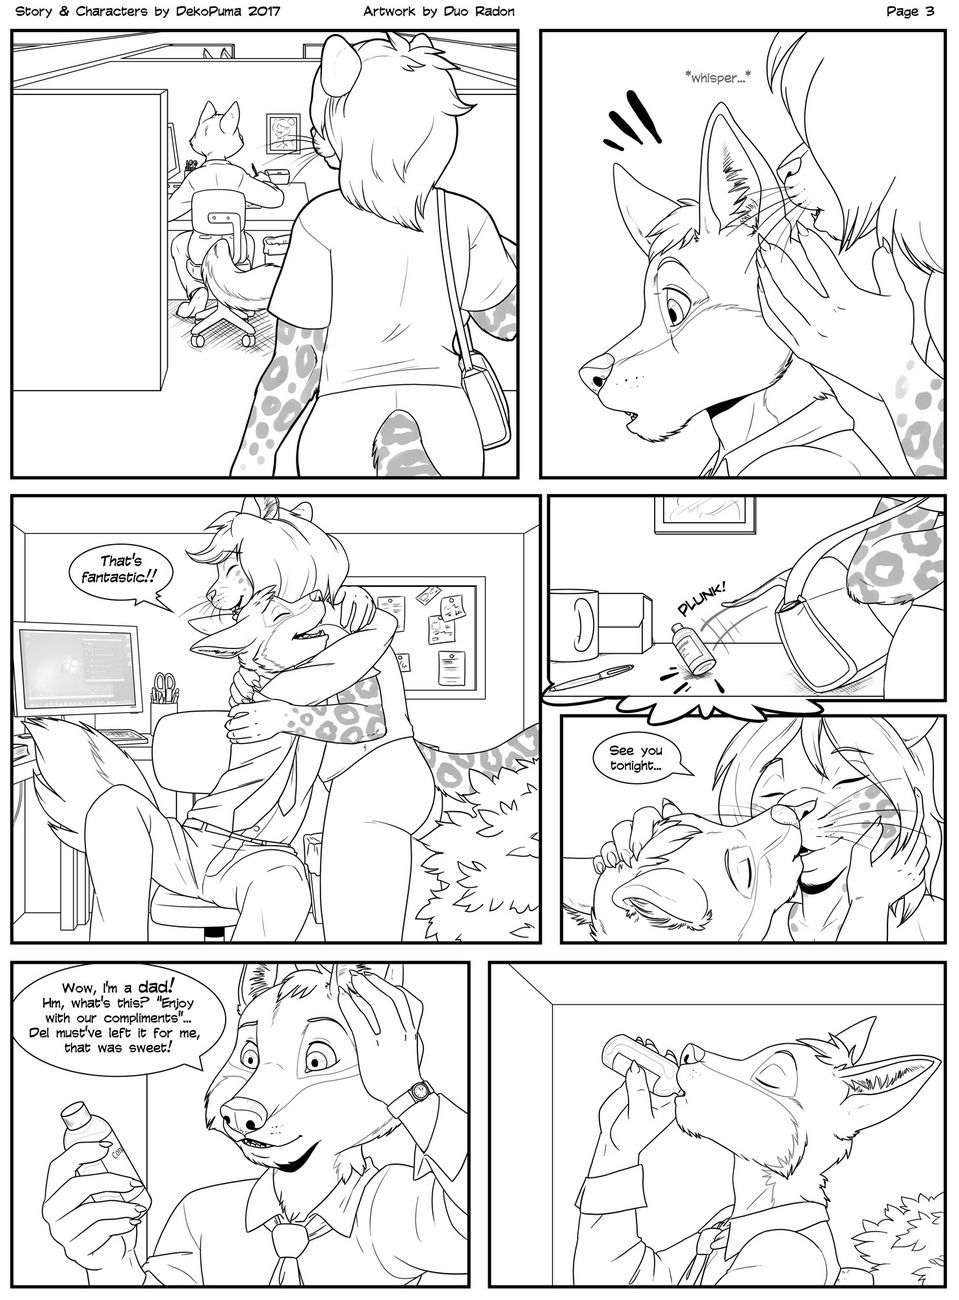 Extra Latte page 1